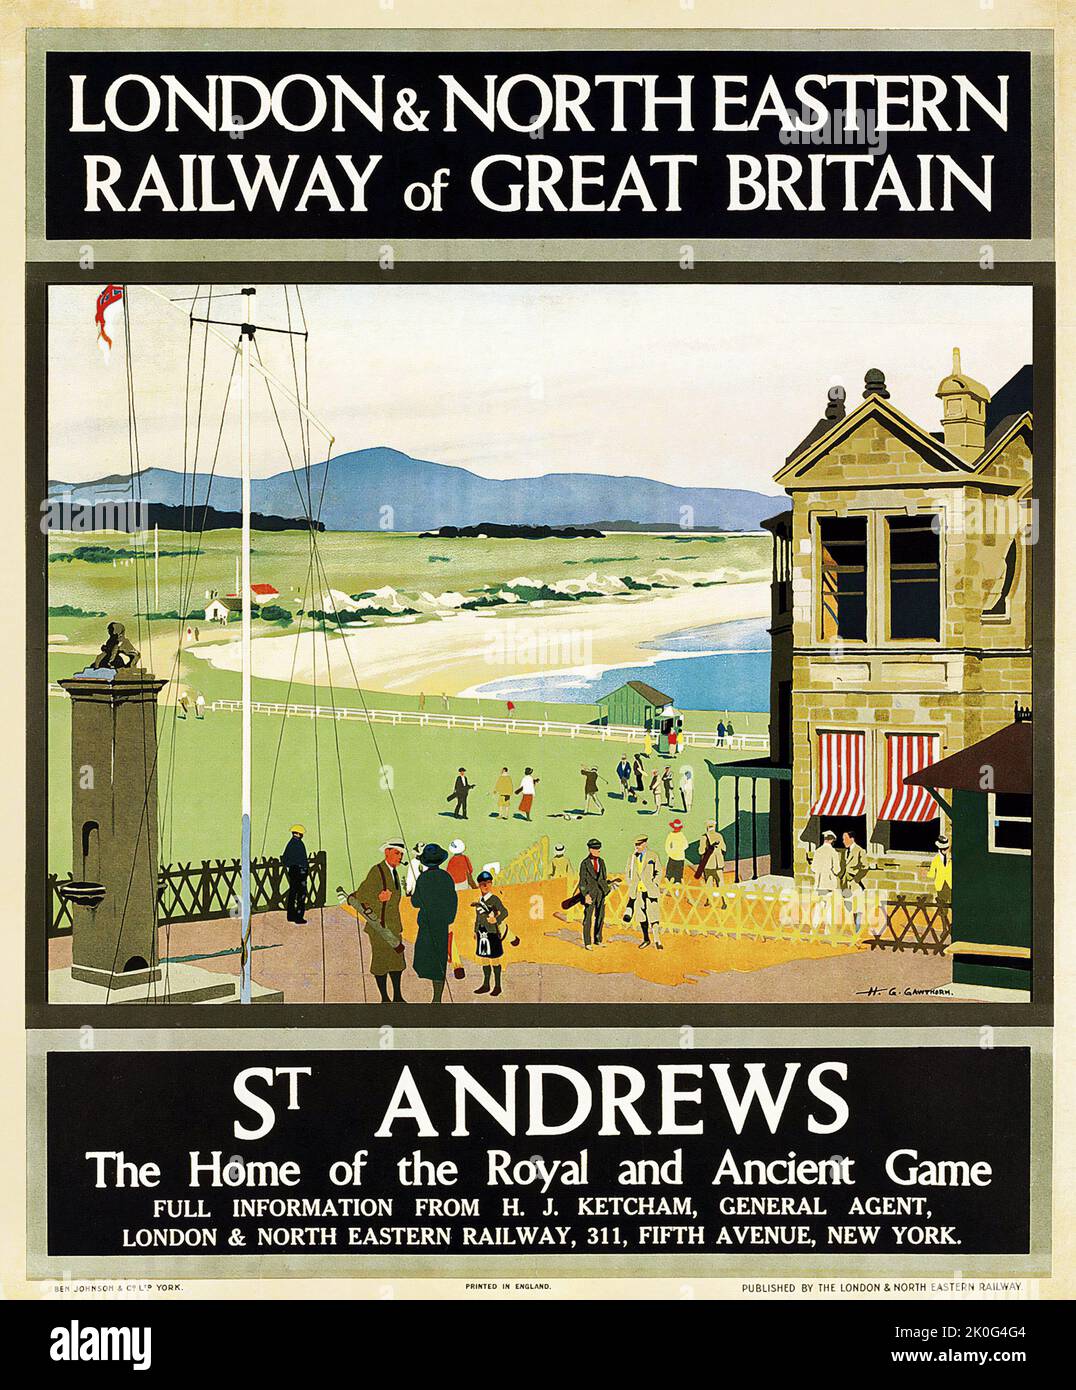 Travel poster - Henry George Gawthorn artwork (1879-1941) ST. ANDREWS The Home of the Royal and Ancient Game (golf) c 1925 Stock Photo